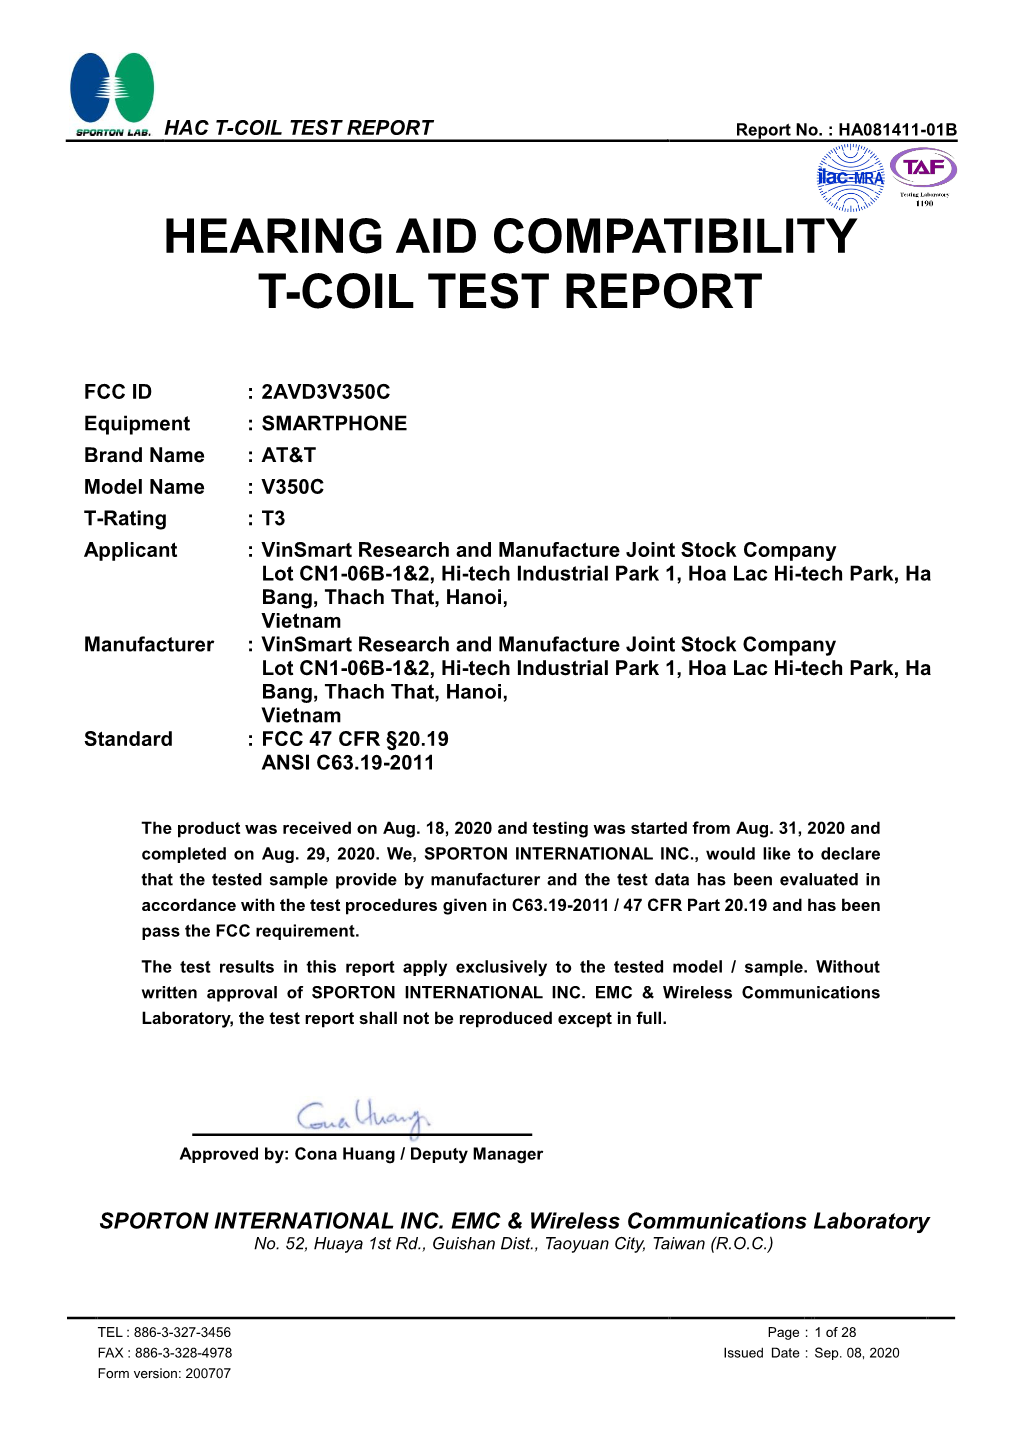 Hearing Aid Compatibility T-Coil Test Report